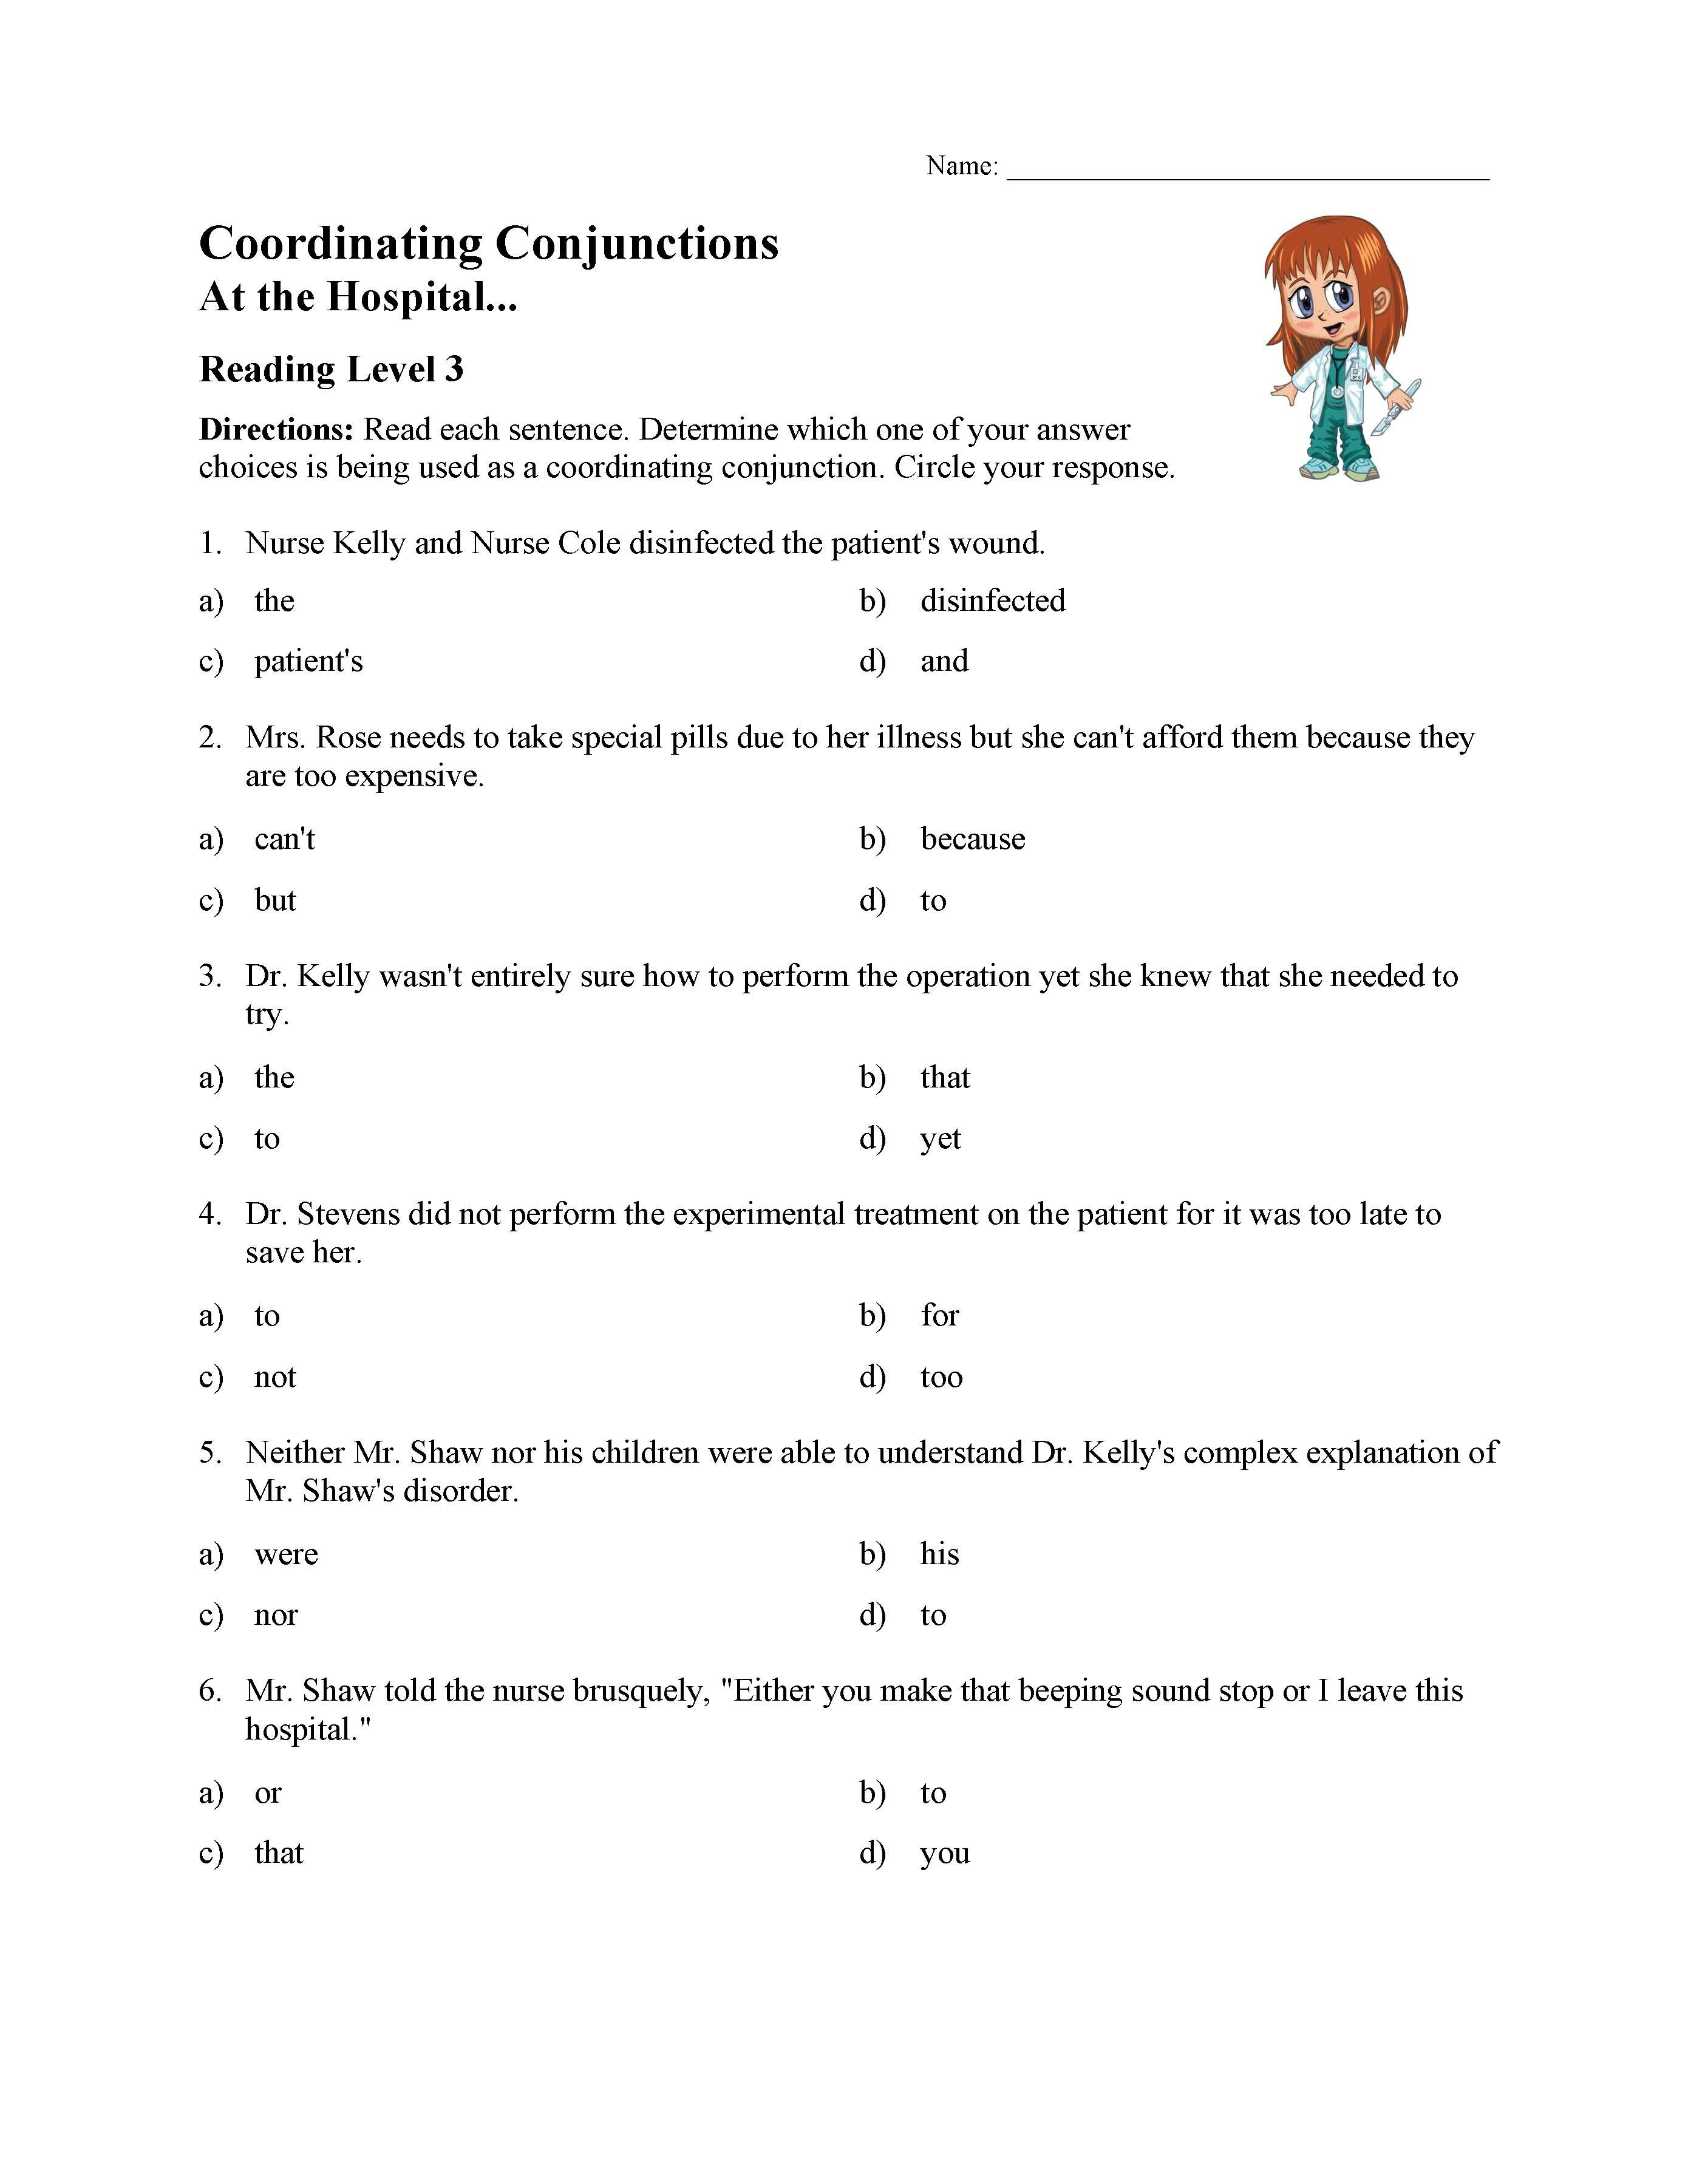 Conjunctions Worksheets for Grade 3 Coordinating Conjunctions Worksheet Reading Level 3